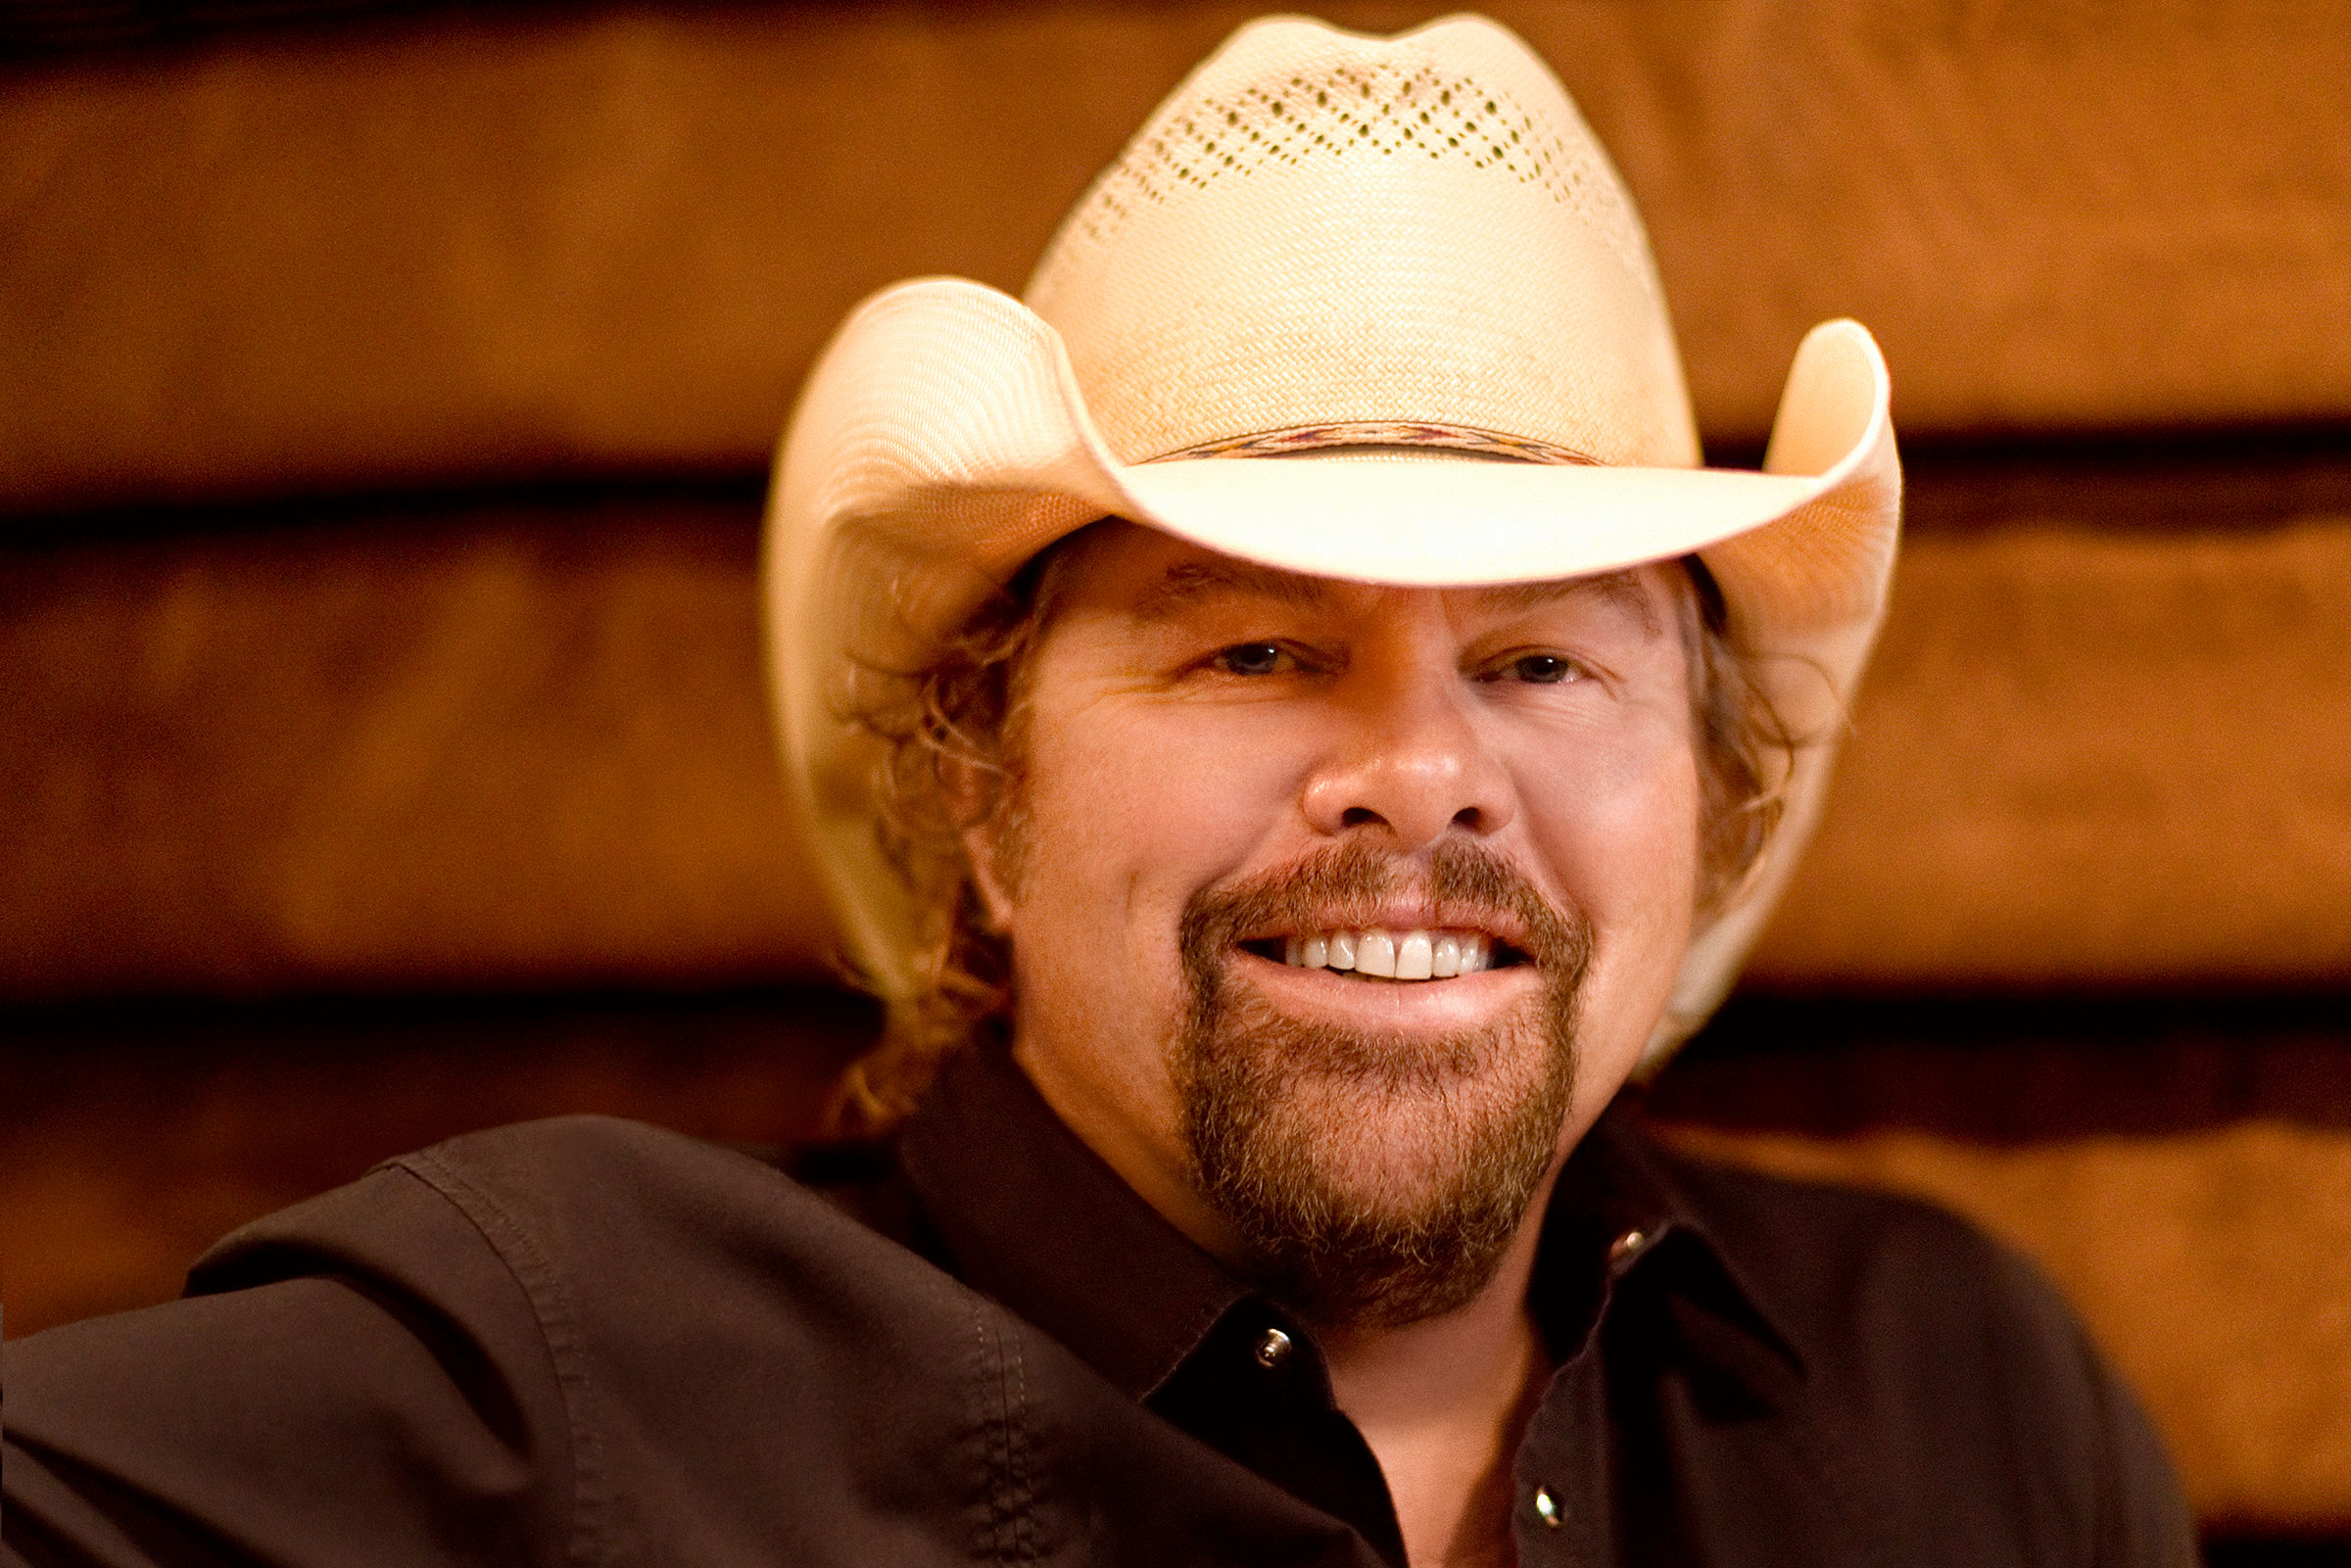 Who is Toby Keith?